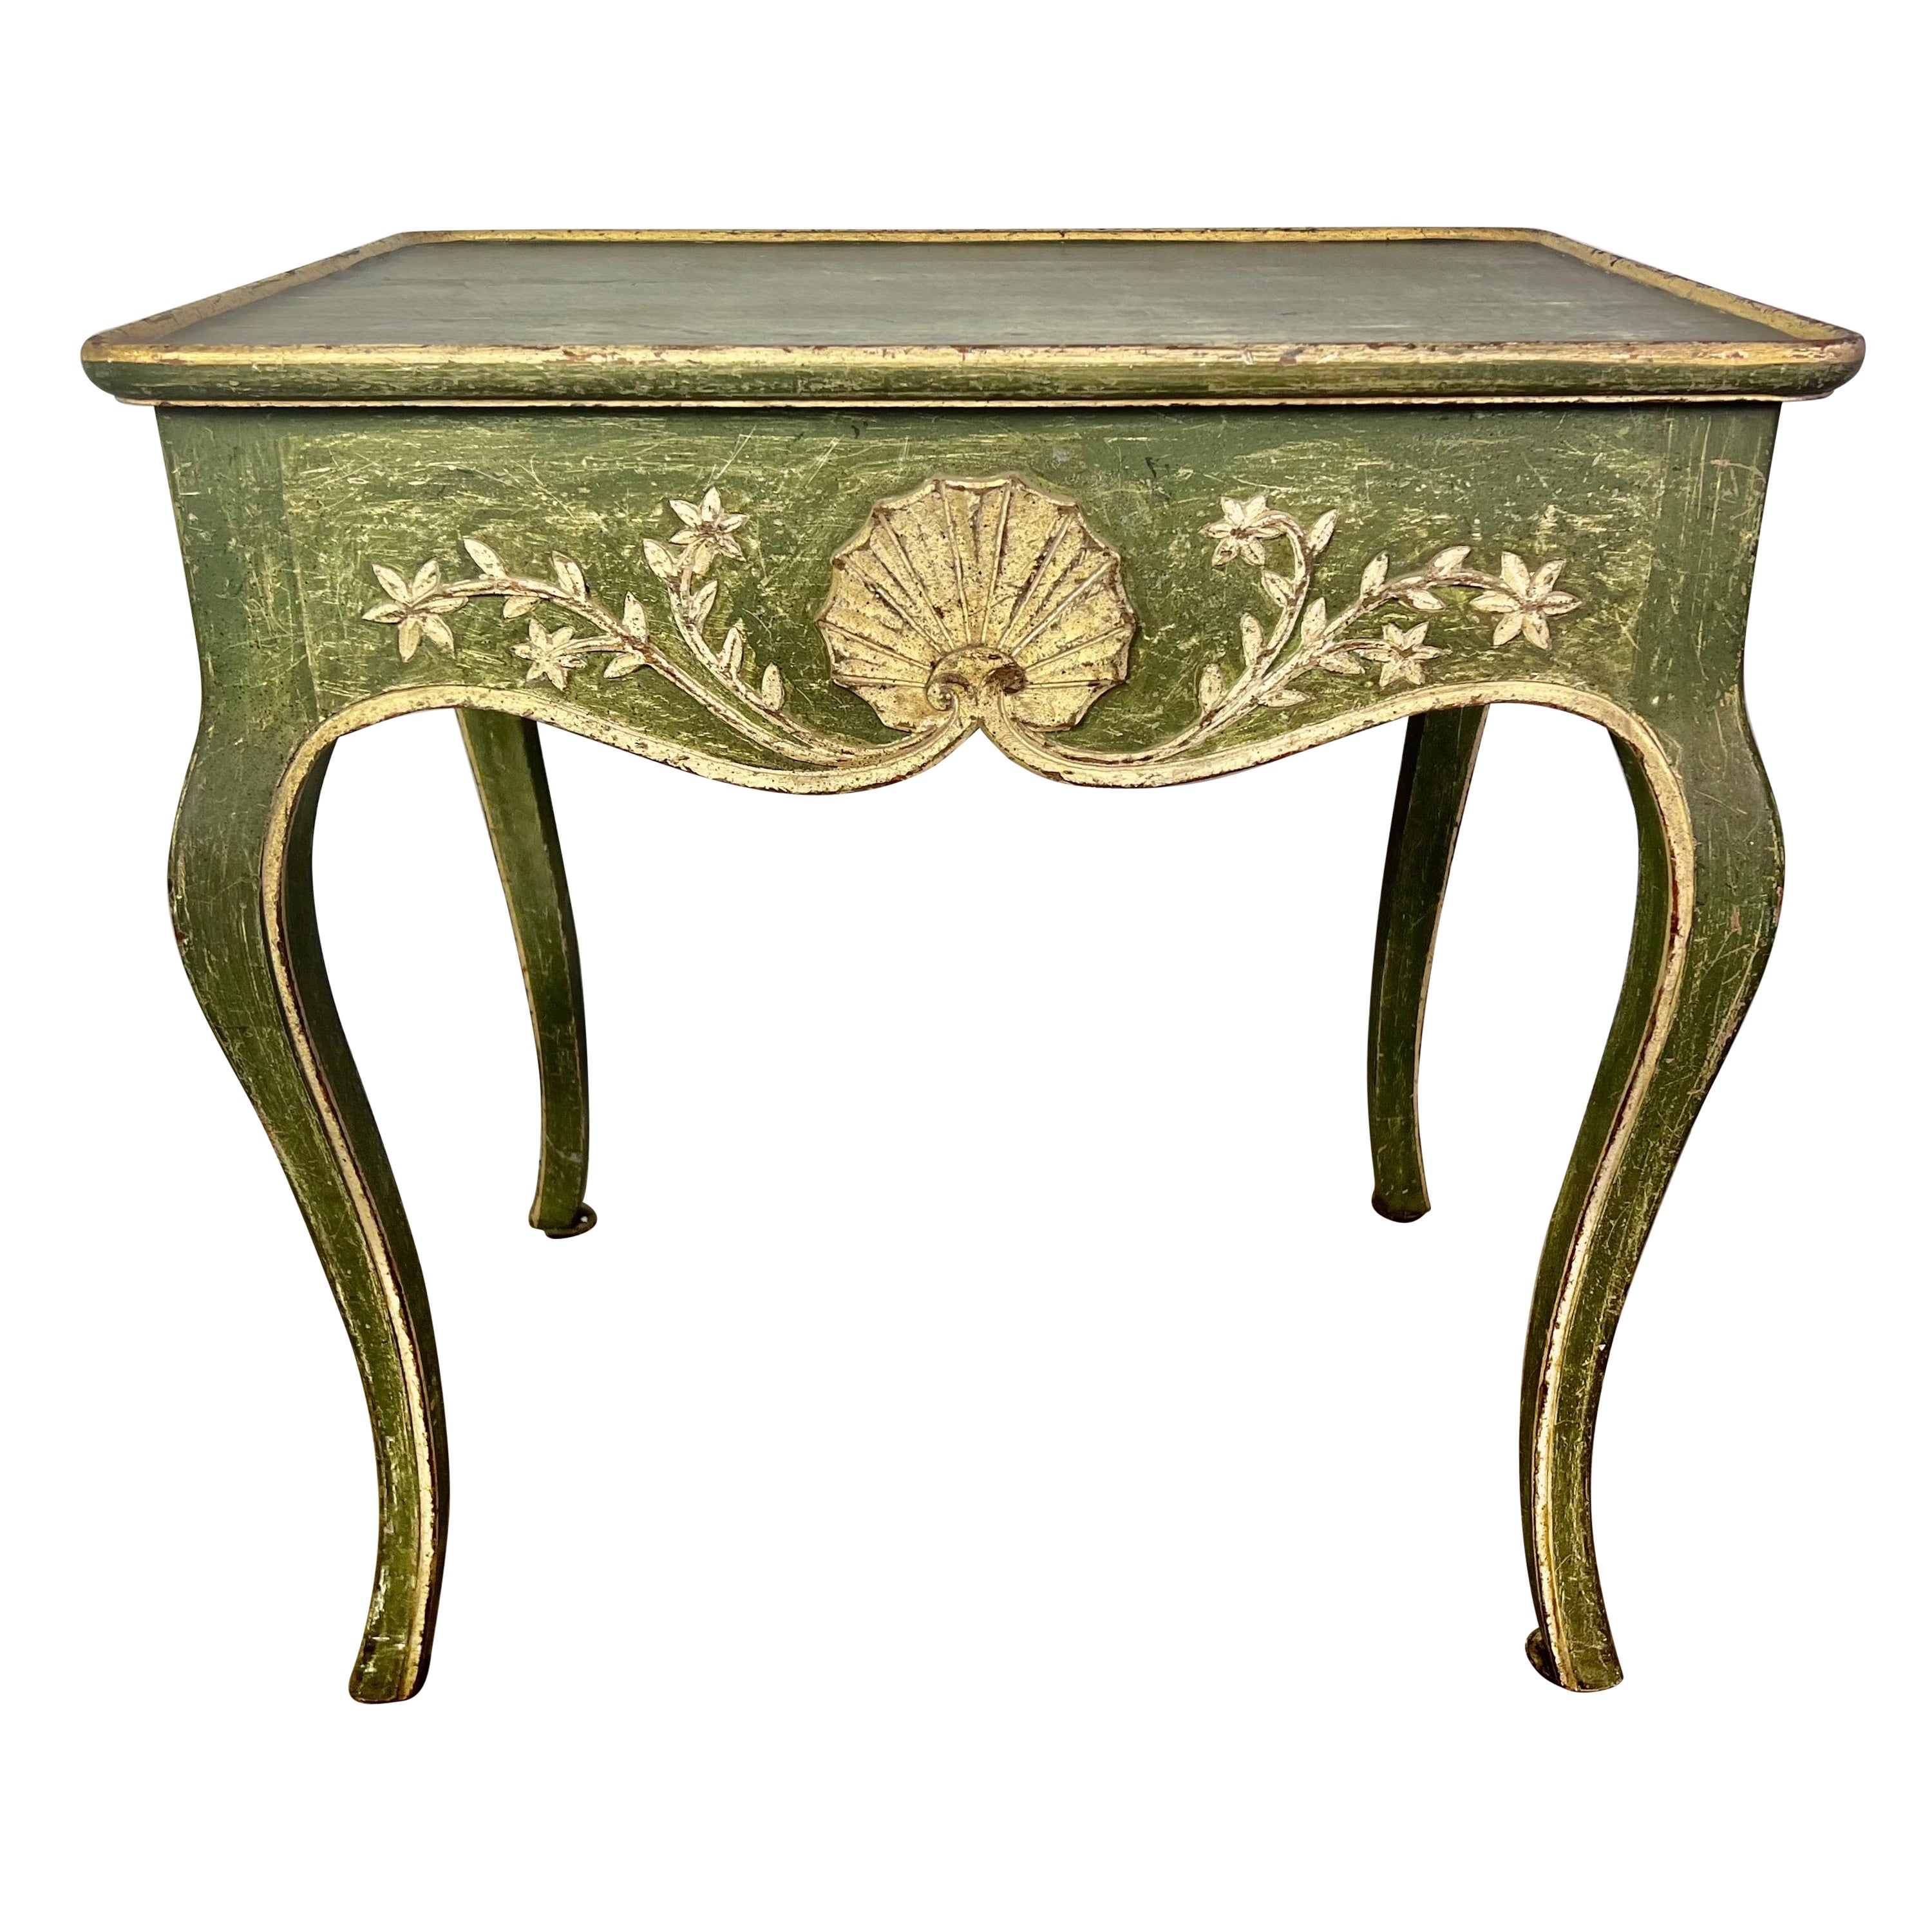 Painted French Provincial Style Side Table with Drawer, circa, 1940s